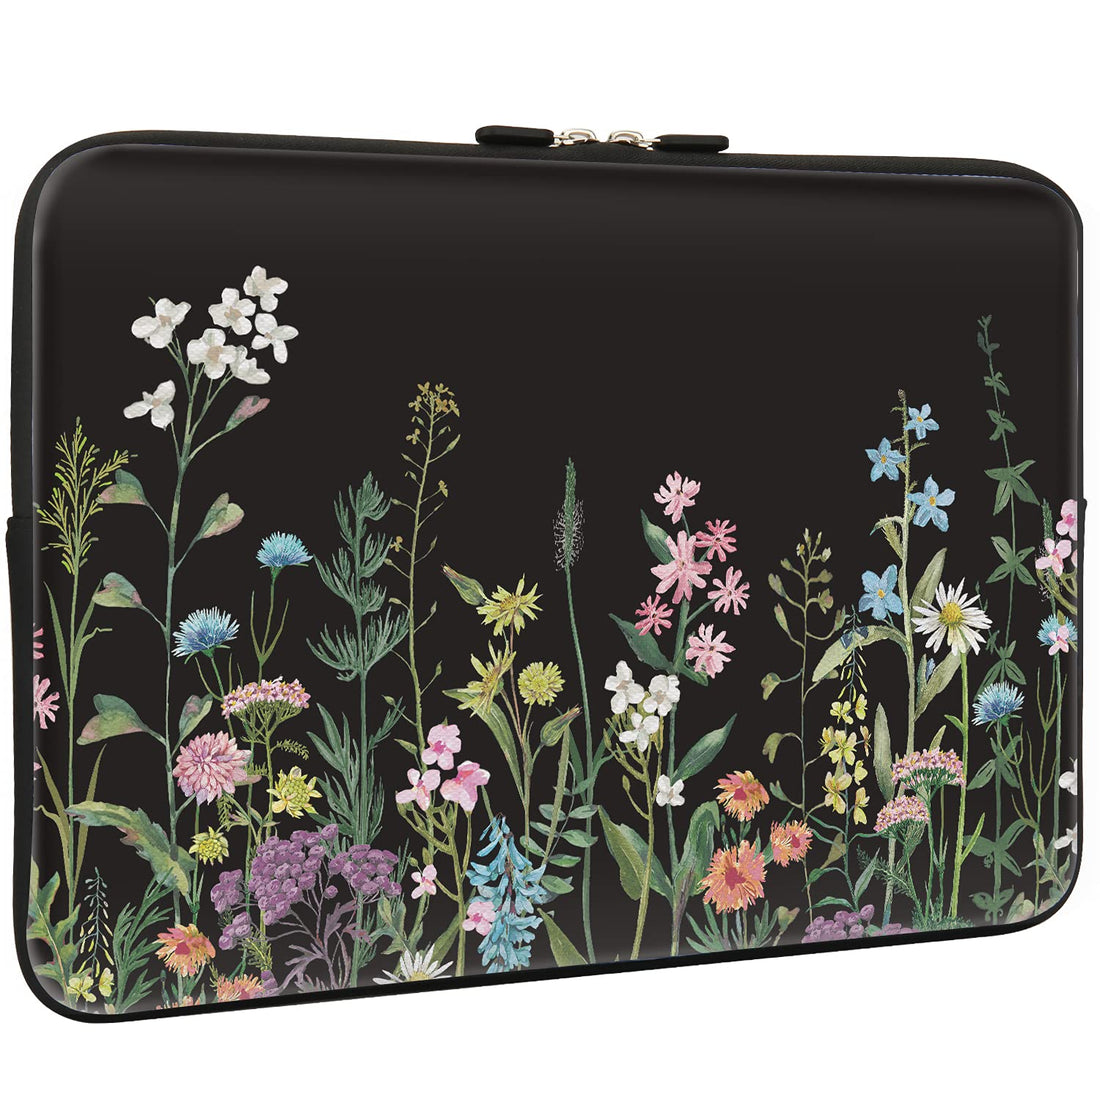 Lapac Wild Flower Design Black Laptop Sleeve Bag 13-14 Inch, Neoprene Light Weight Computer Skin Bag, Notebook Carrying Cover Bags for 13/13.3 Inch